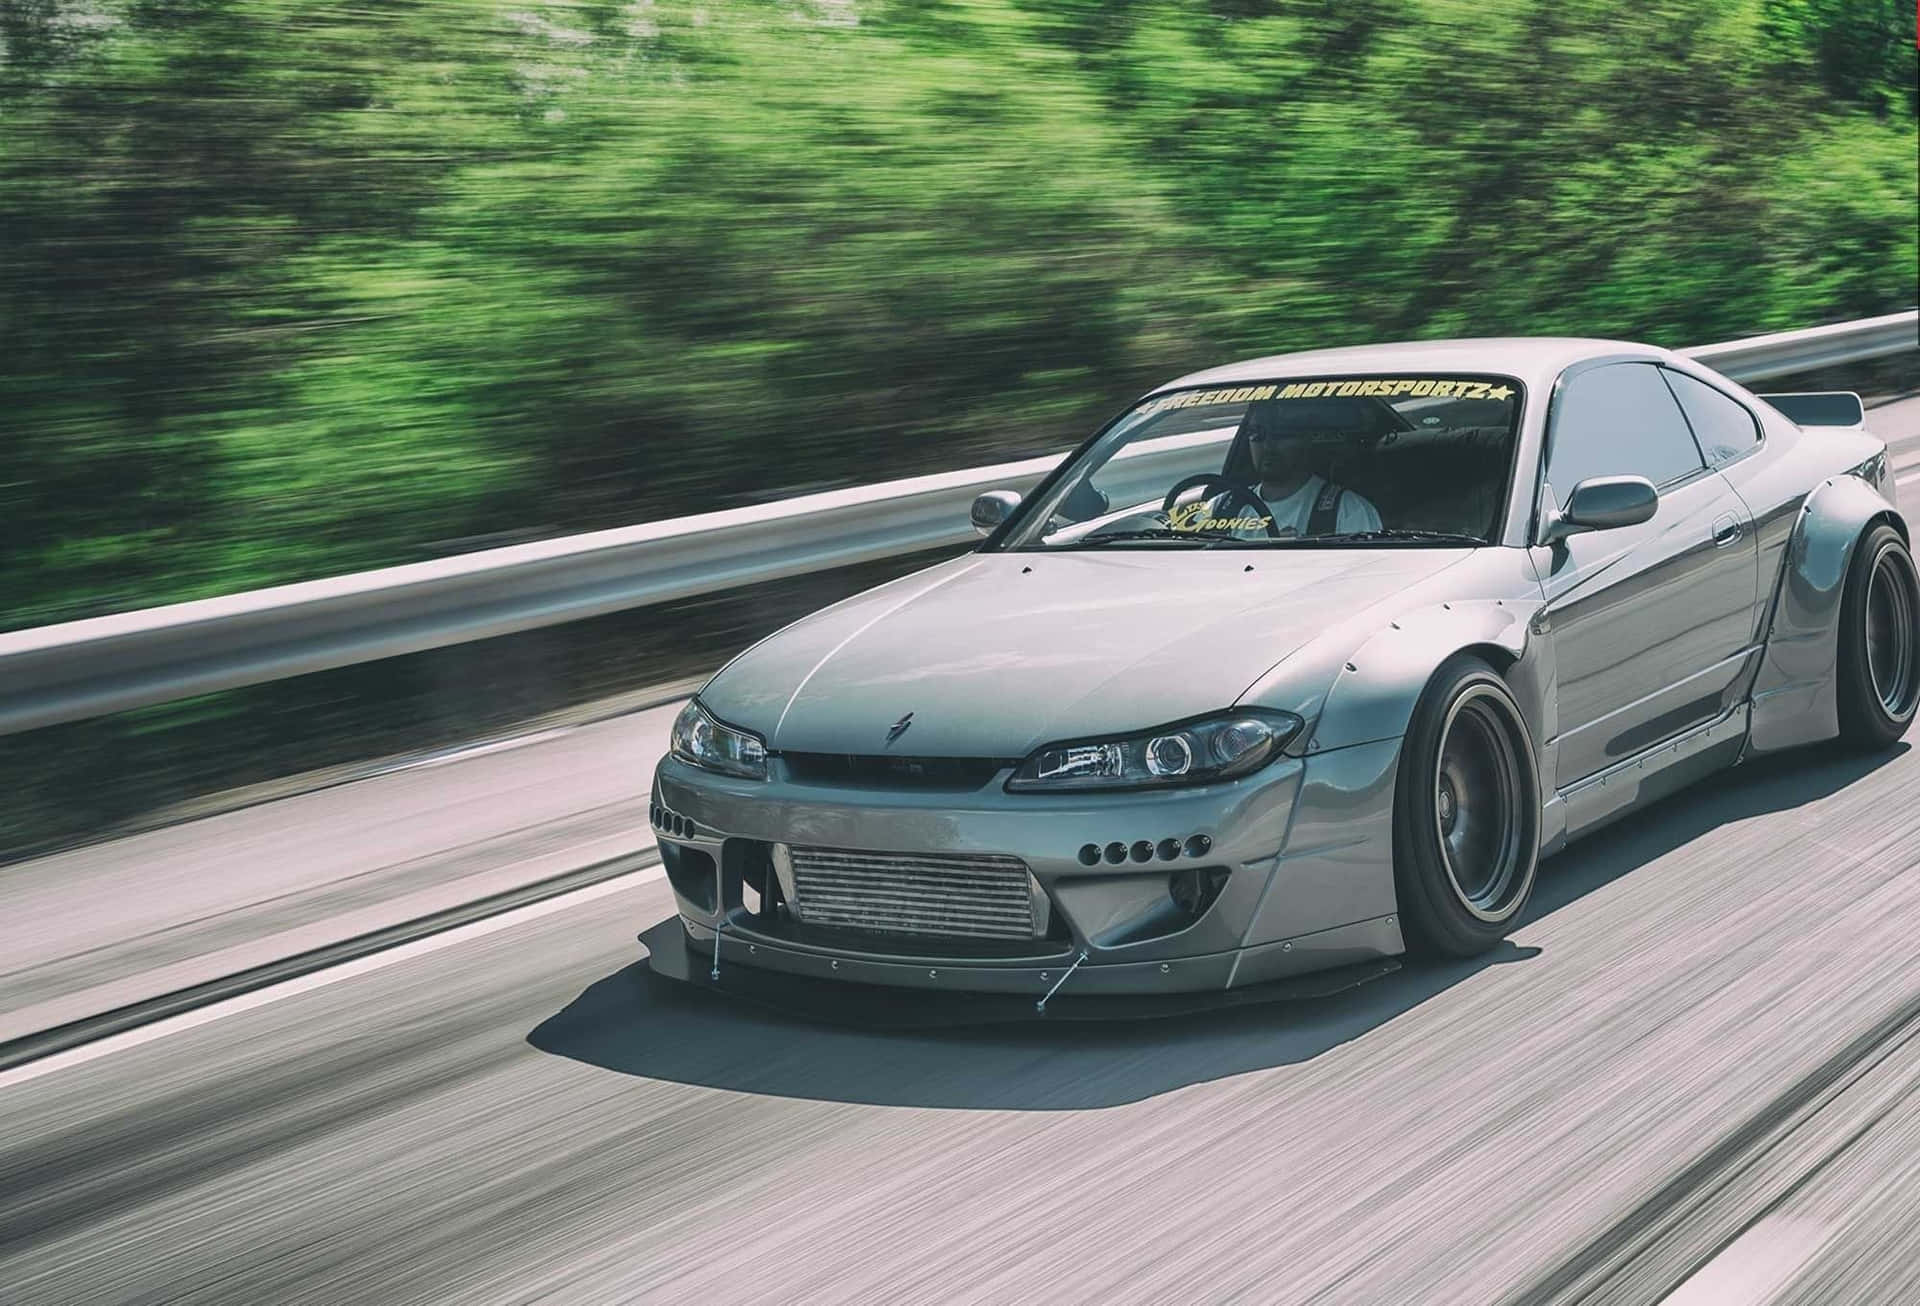 Feel the power of Nissan Silvia S15 on the road Wallpaper